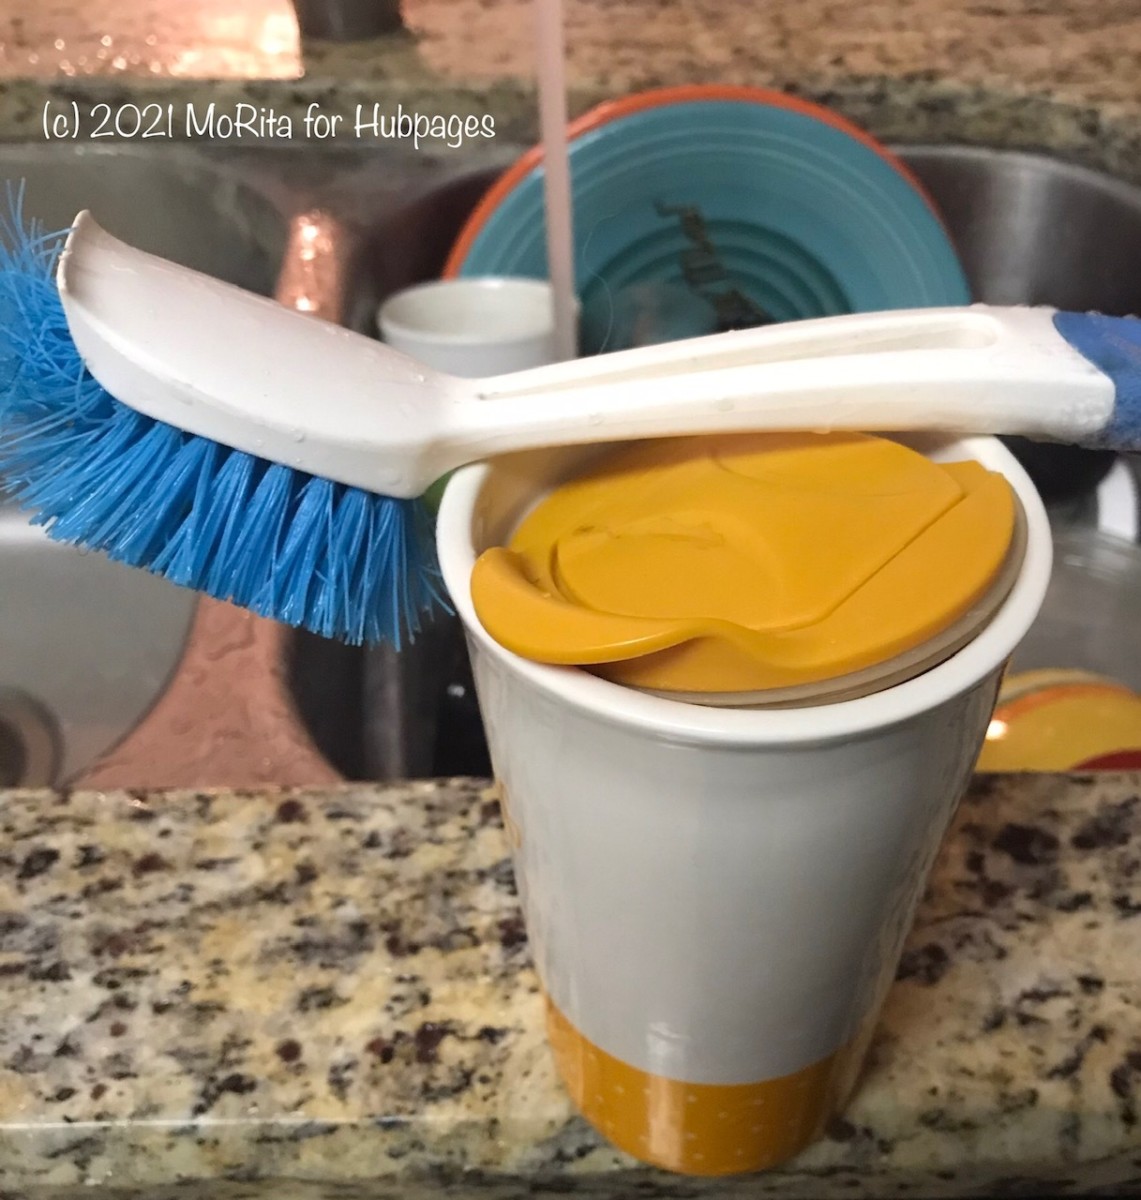 A dish brush and a ceramic cup containing bleach, dish soap, and water provide a quick way to clean dishes throughout the day.